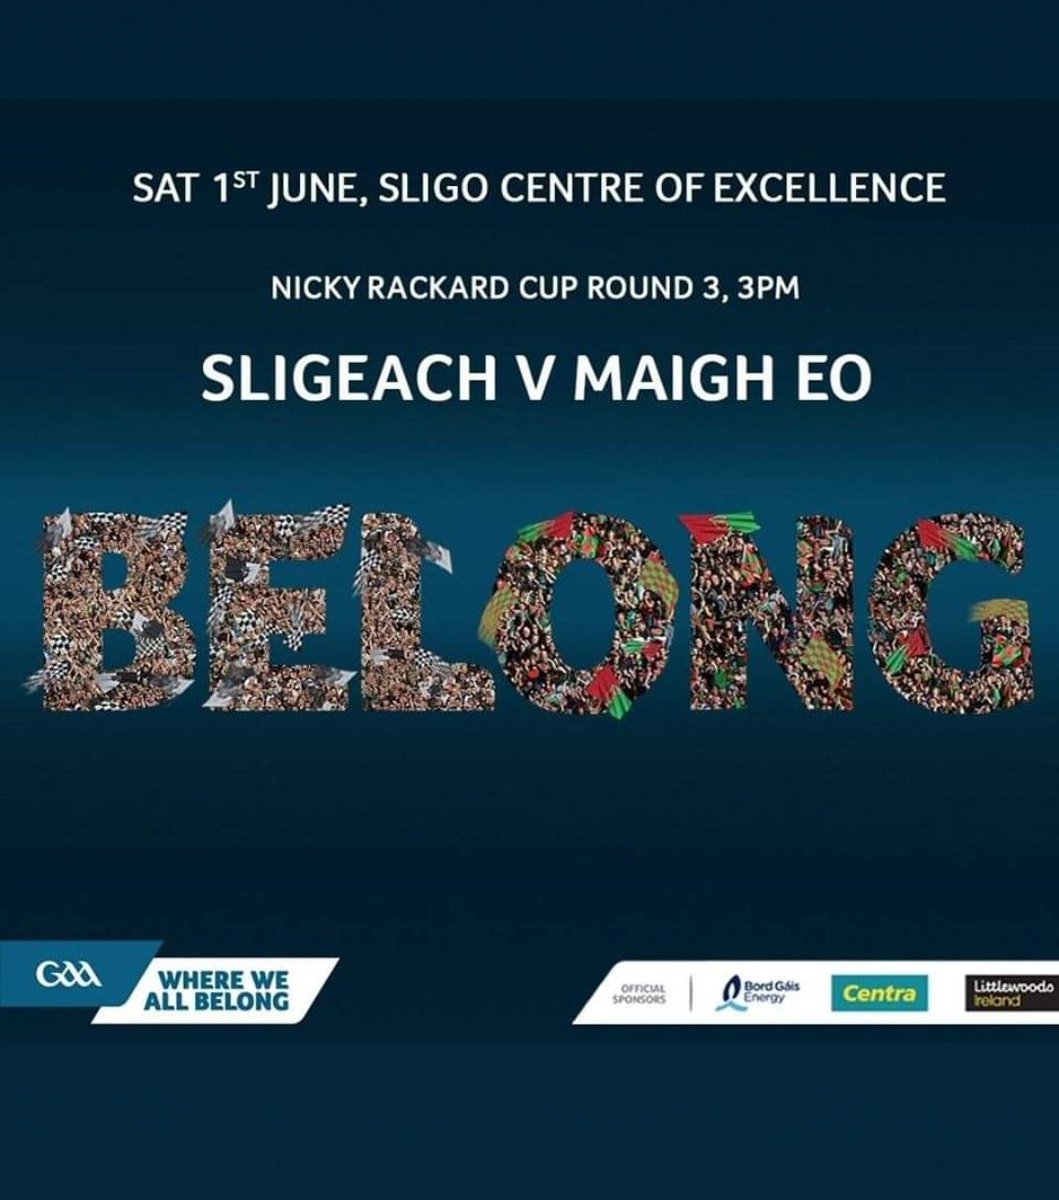 Big test for the Table toppers v Mayo tomorrow at Scarden. Come out folks and support these lads💪👌😁@GoGamesGAA @sligogaa @CelticU17 @CStrandhill @CalryStJosephs @molaisegaels @ConnachtGAA @NickyRackardCup @nickybroujos @strandhillns @StrandCelticFC